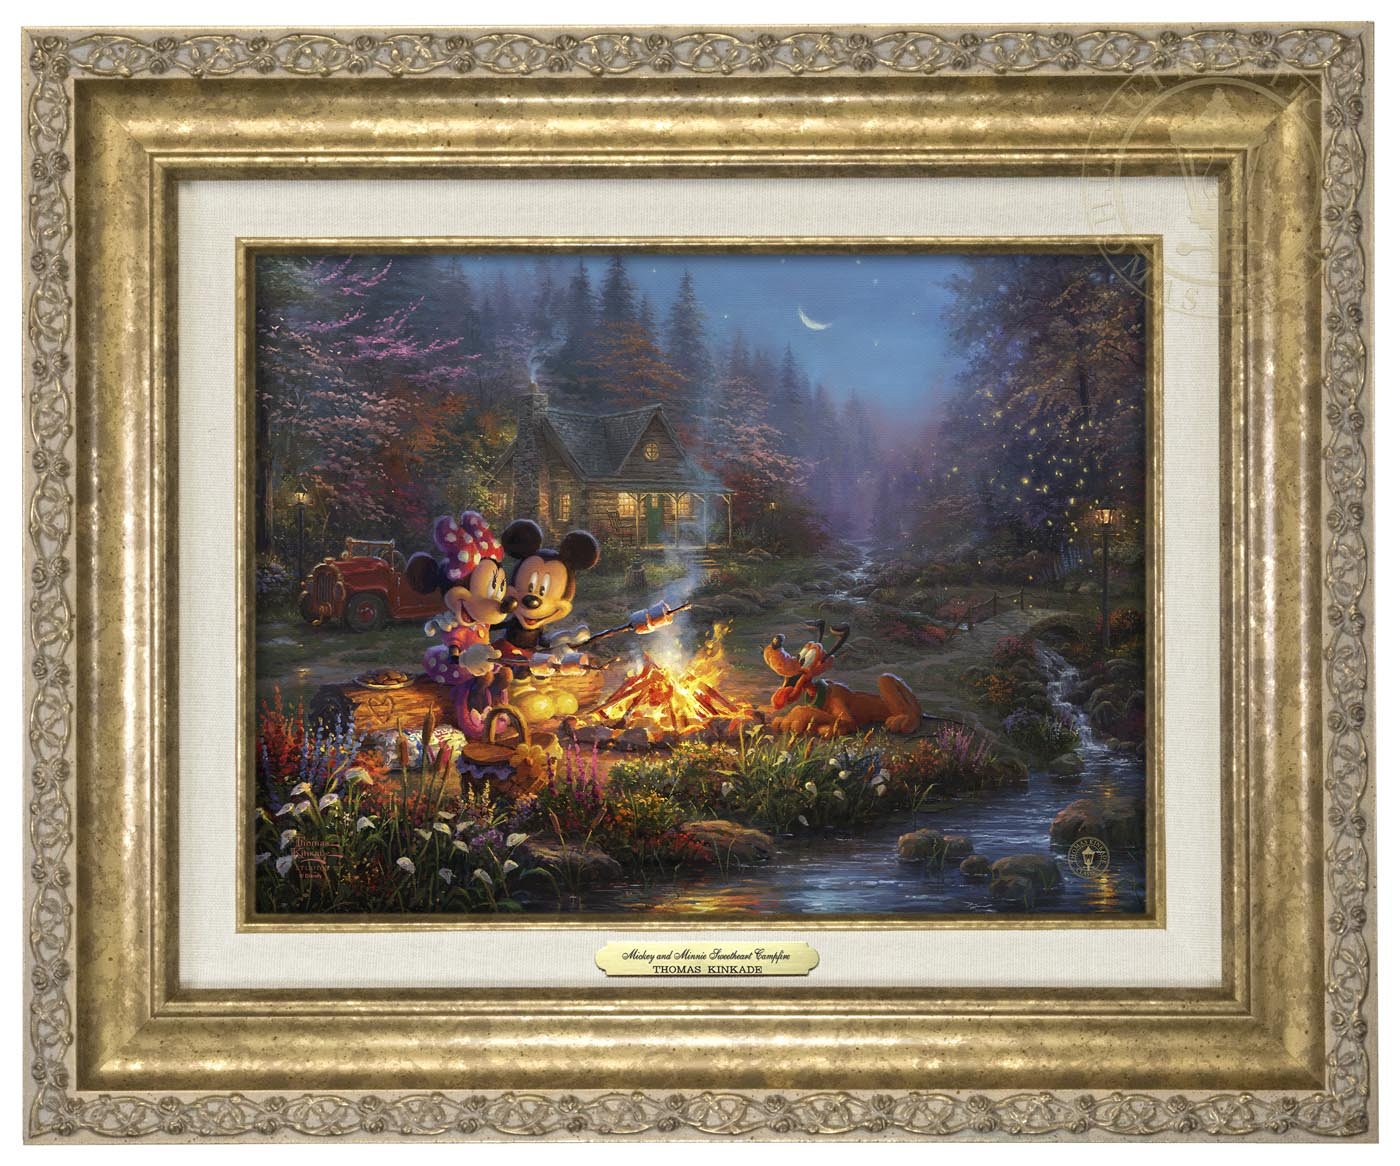 Mickey and Minnie are seen relaxing together on an old log, roasting marshmallows over a crackling campfire after spending a long day of exploring the vast trails of the forest - Antique Gold Frame